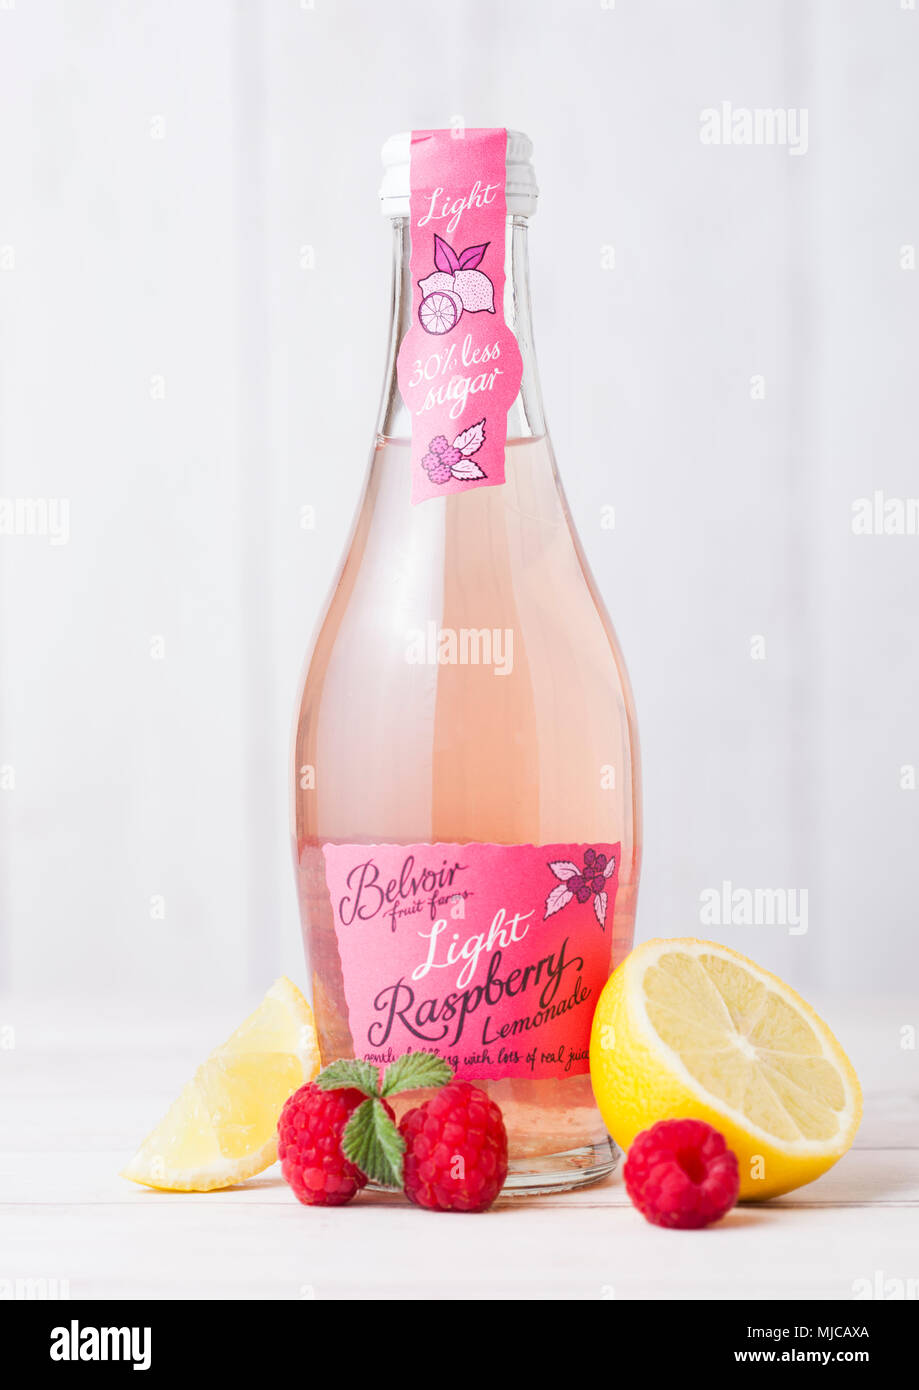 LONDON, UK - APRIL 27, 2018: Glass bottle of Belvoir soda drink lemonade with raspberry on wooden background with raw fruits and lemon. Stock Photo